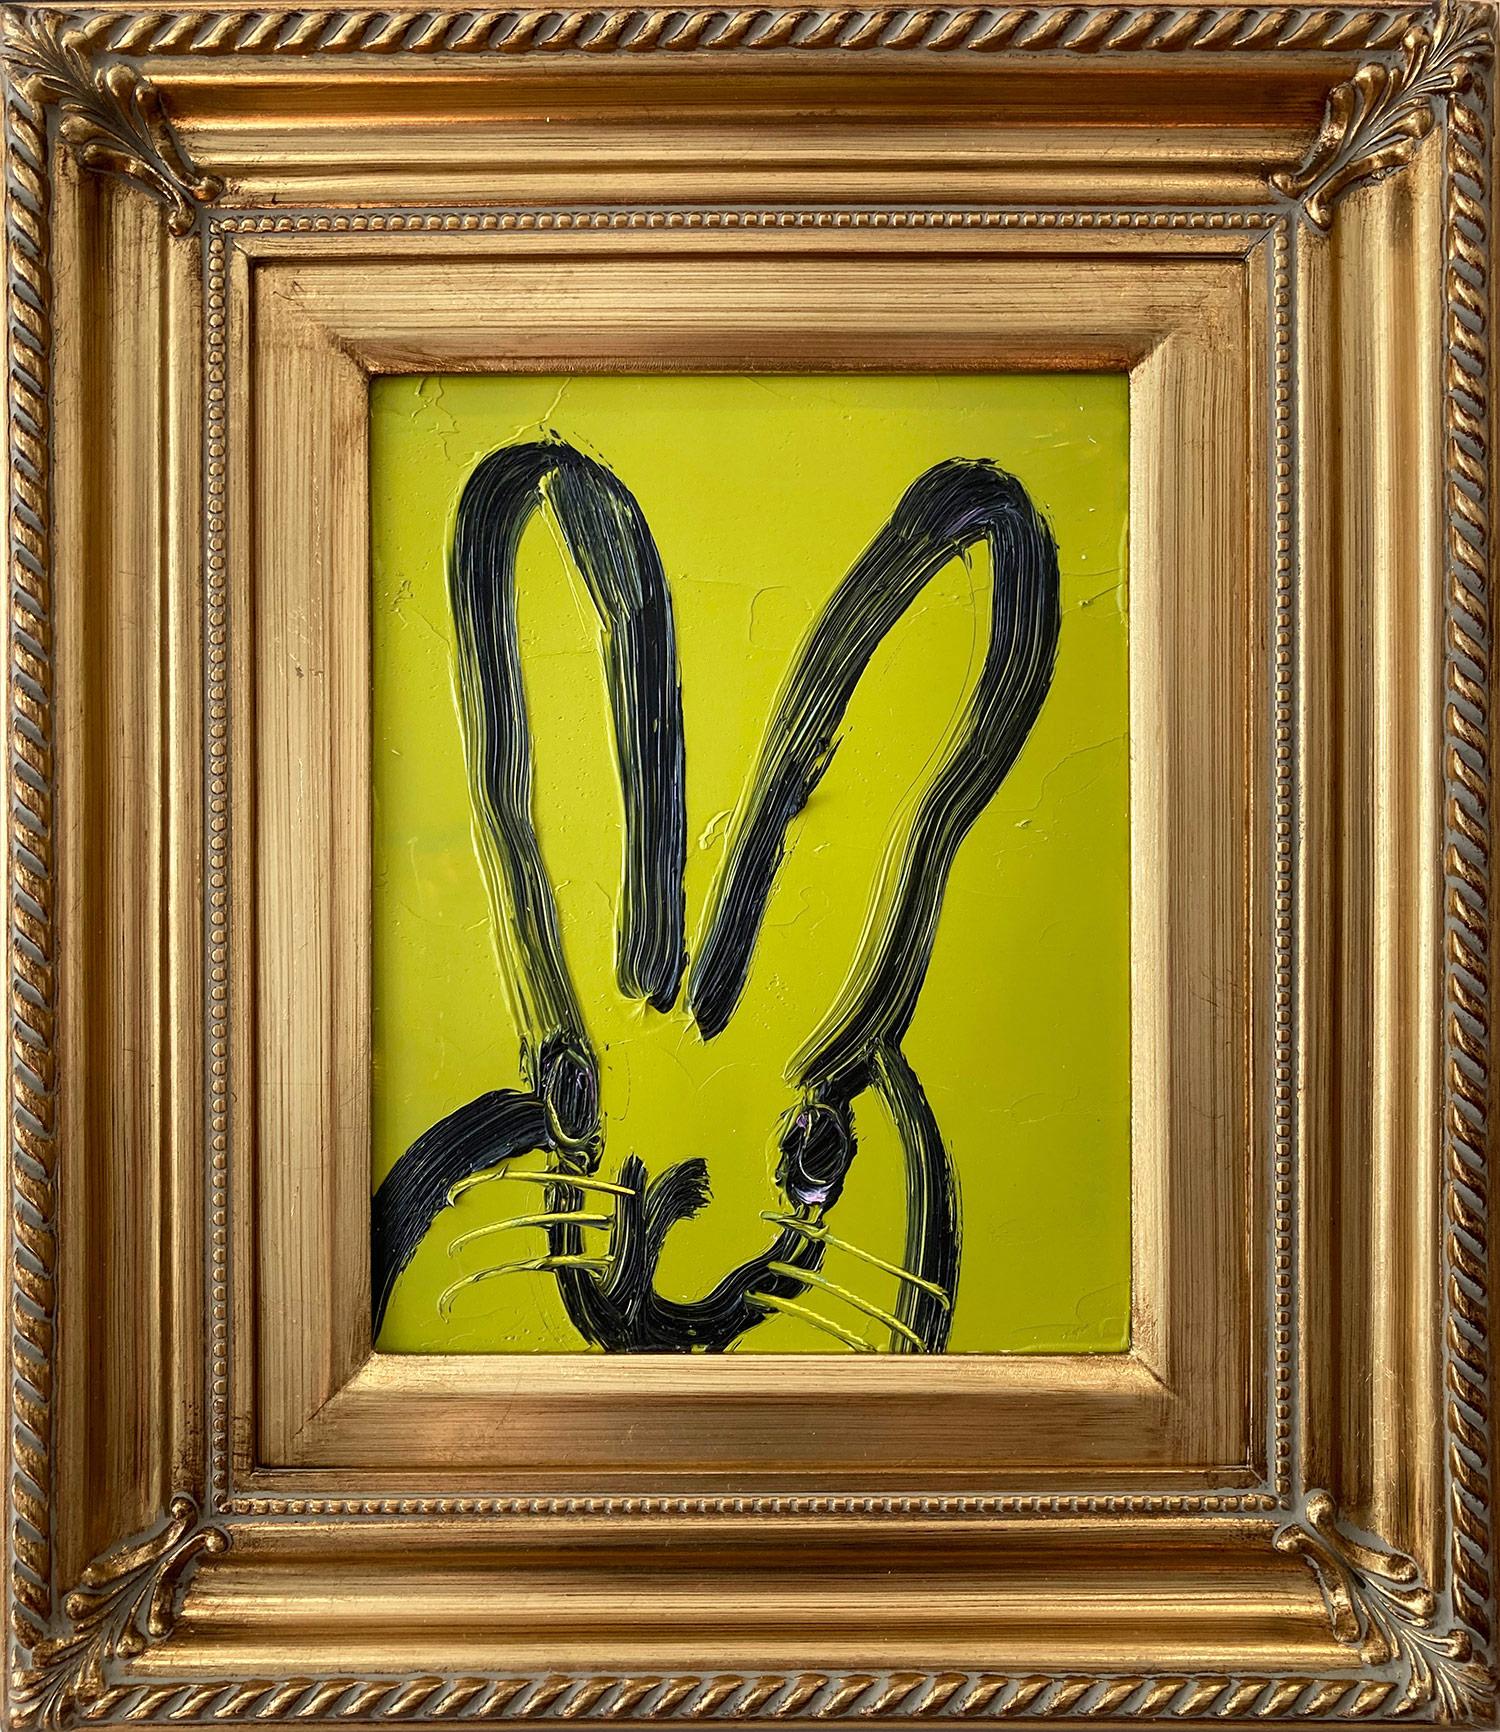 Hunt Slonem Abstract Painting - "Citron" Black Bunny on Green Background Oil Painting on Wood Panel Framed